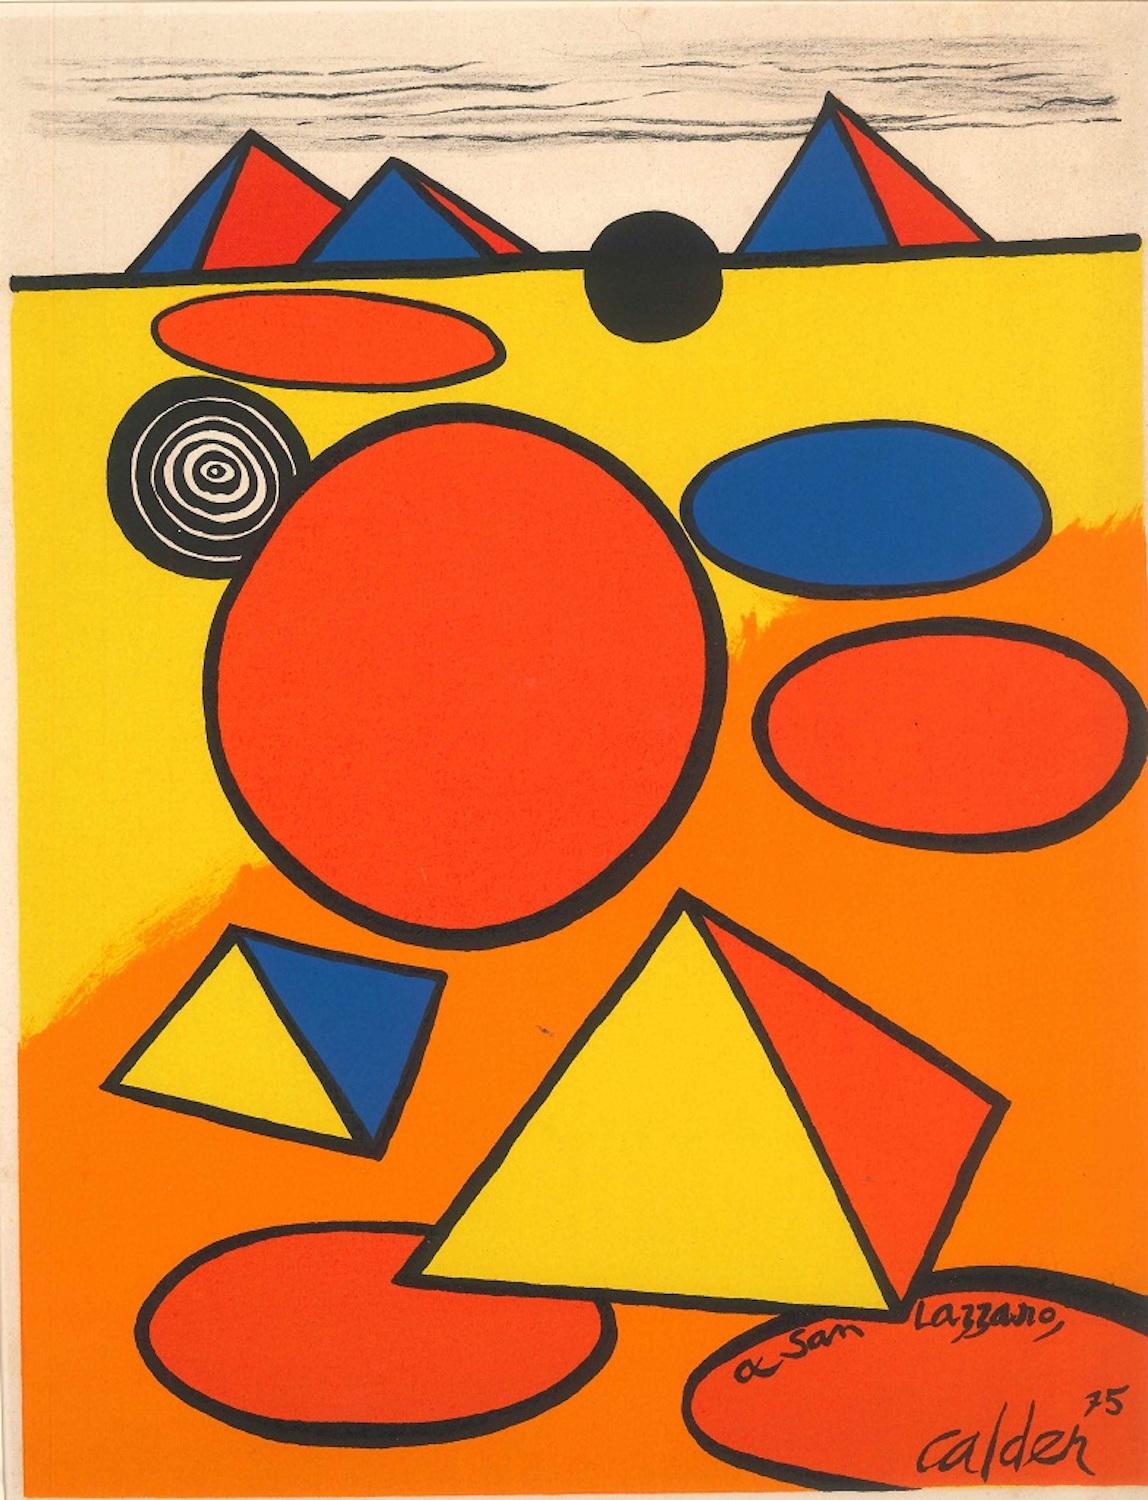 A San Lazzaro or Hommage à San Lazzaro is a wonderful color lithograph realized in 1975 by Alexander Calder.

It is an artist proof, signed and dated on the matrix on the bottom right. Printed in October 1975 in Paris by Arte Adrien Maeght for the